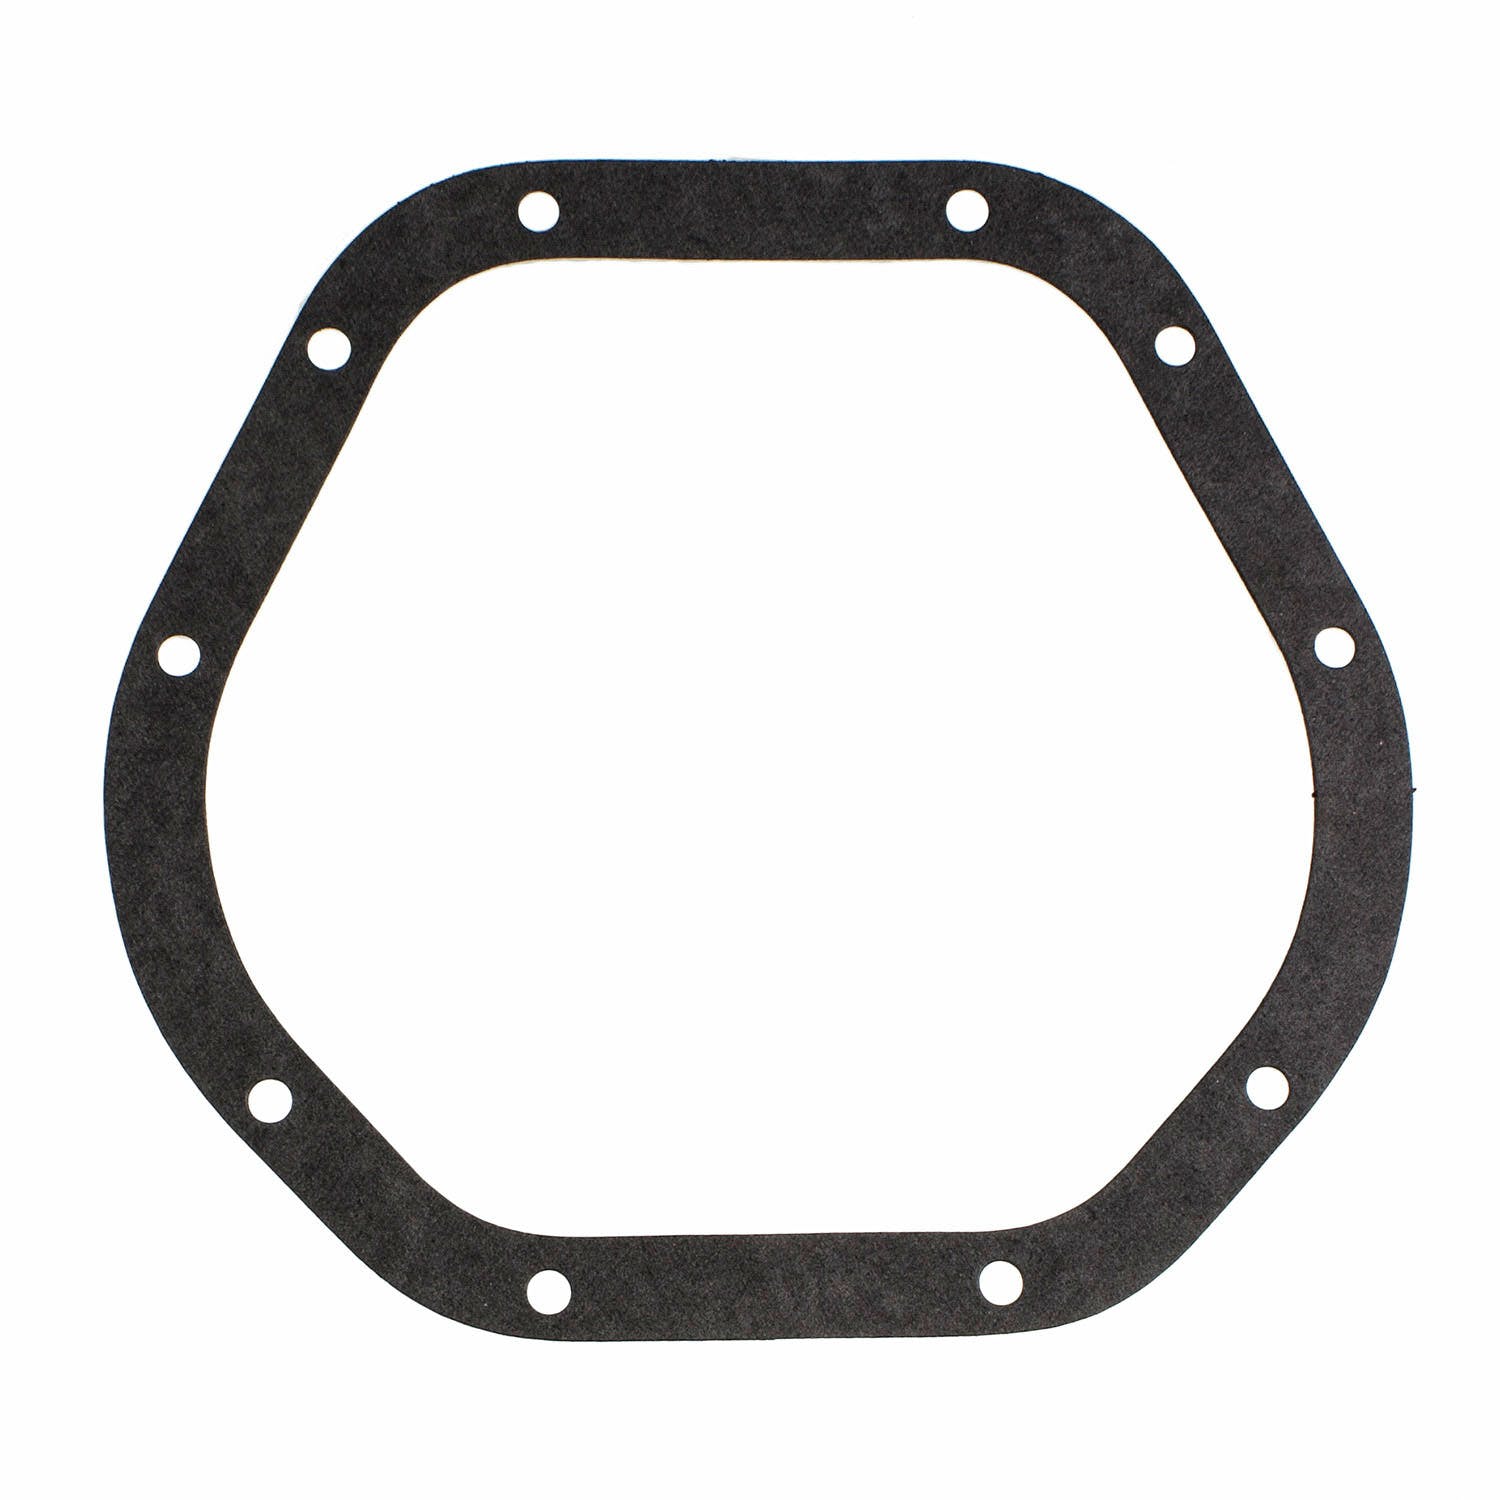 Motive Gear 5114 Differential Cover Gasket